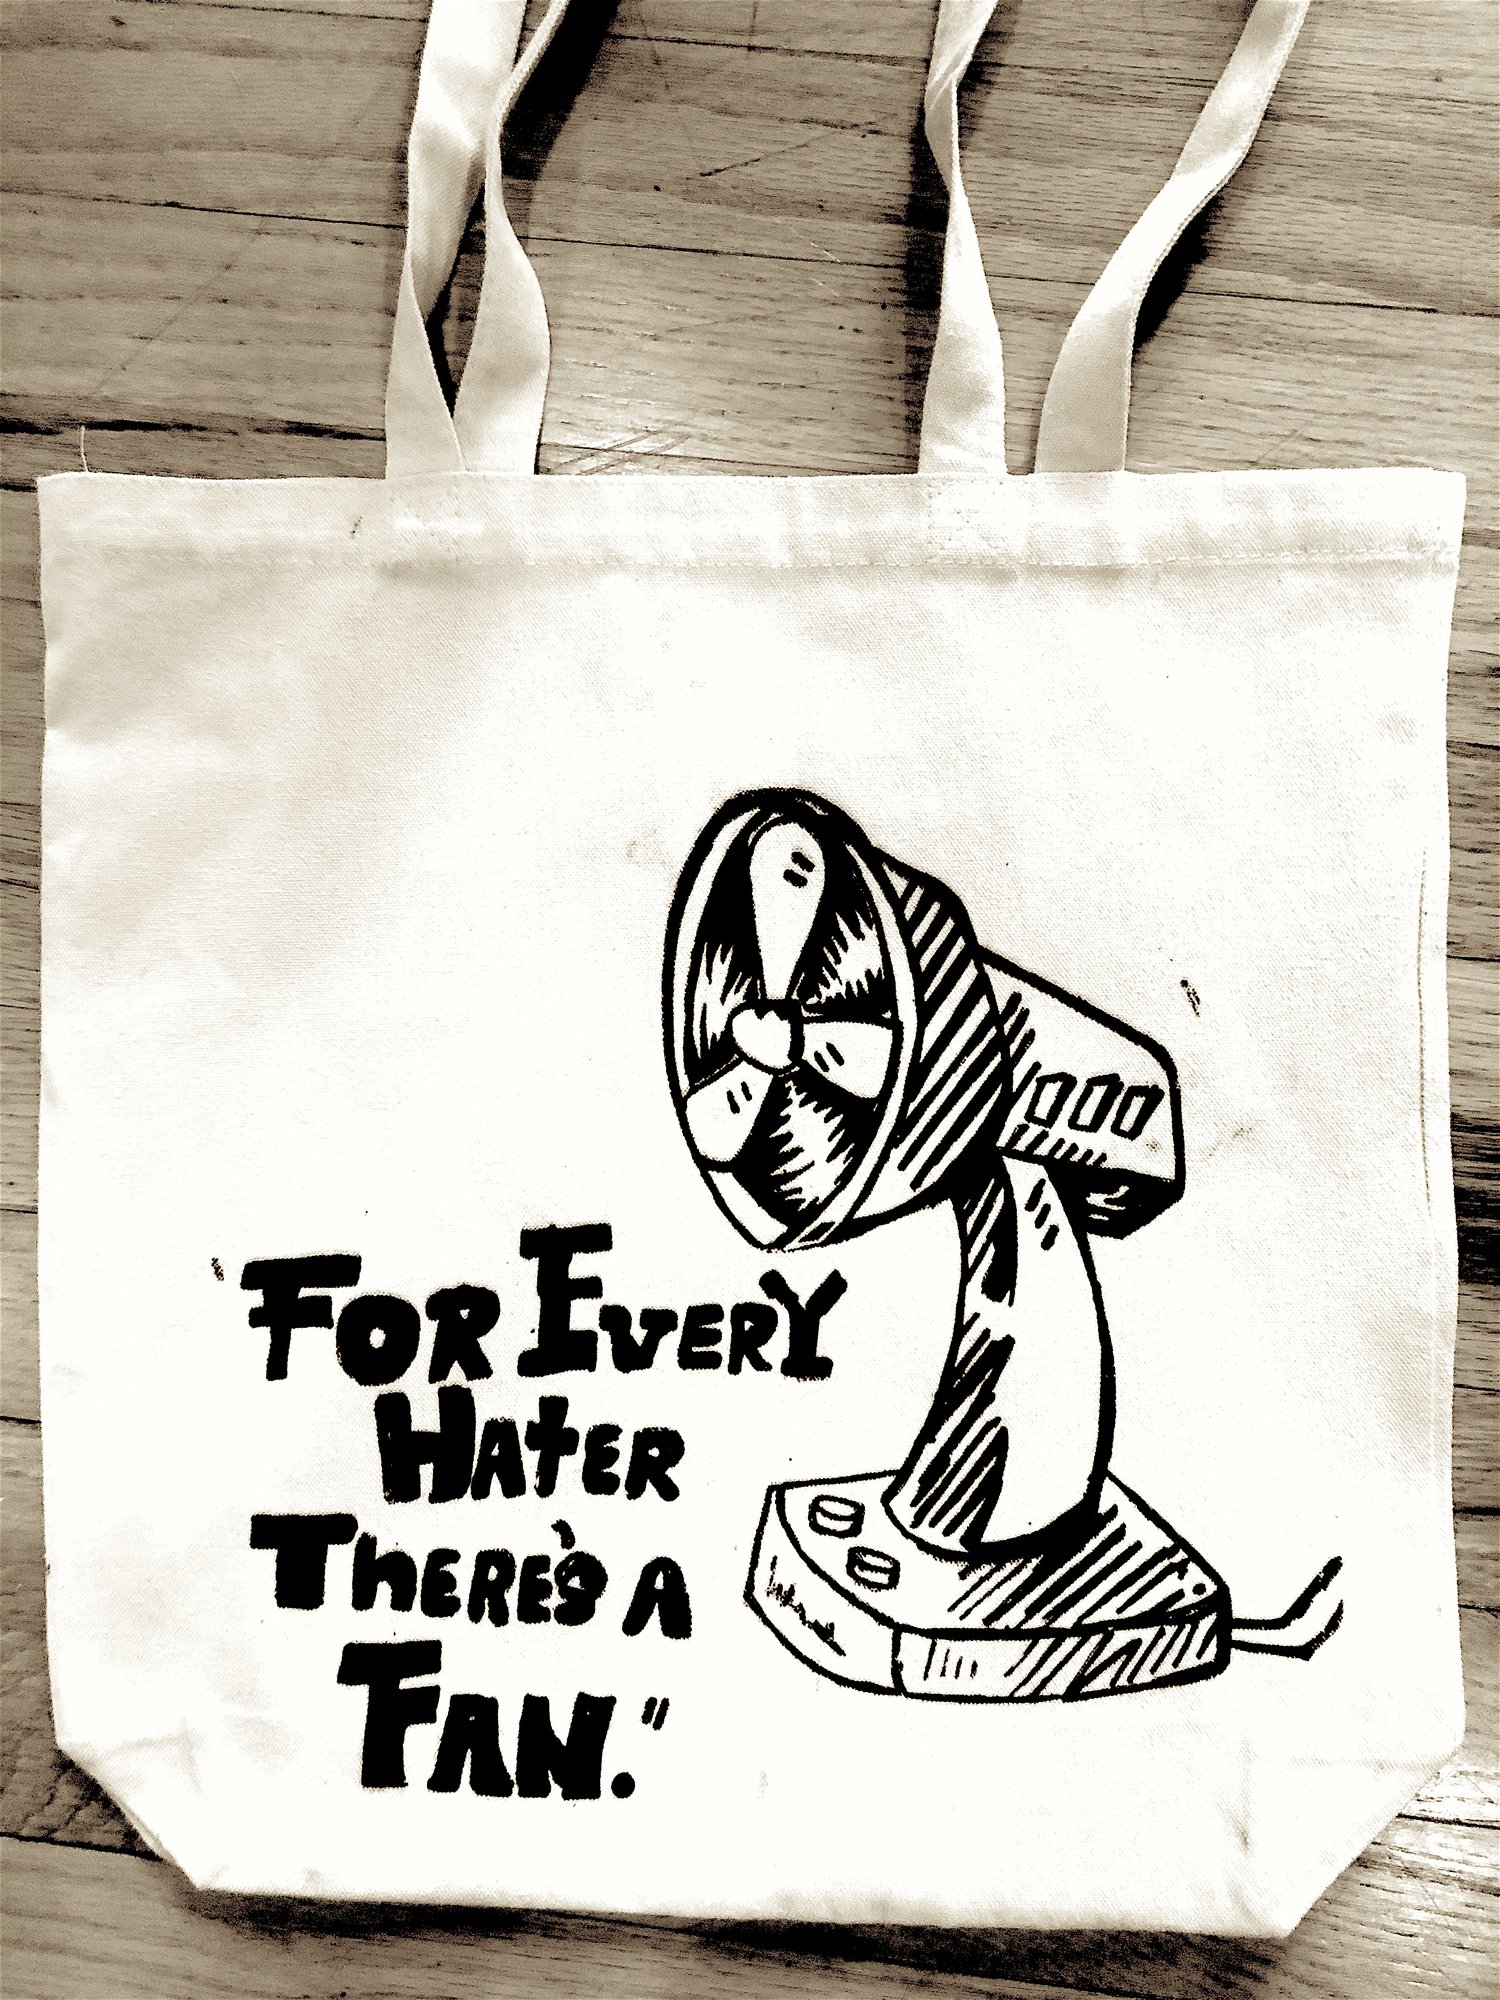 Image of "For Every Hater Theres A Fan" - Tote bag